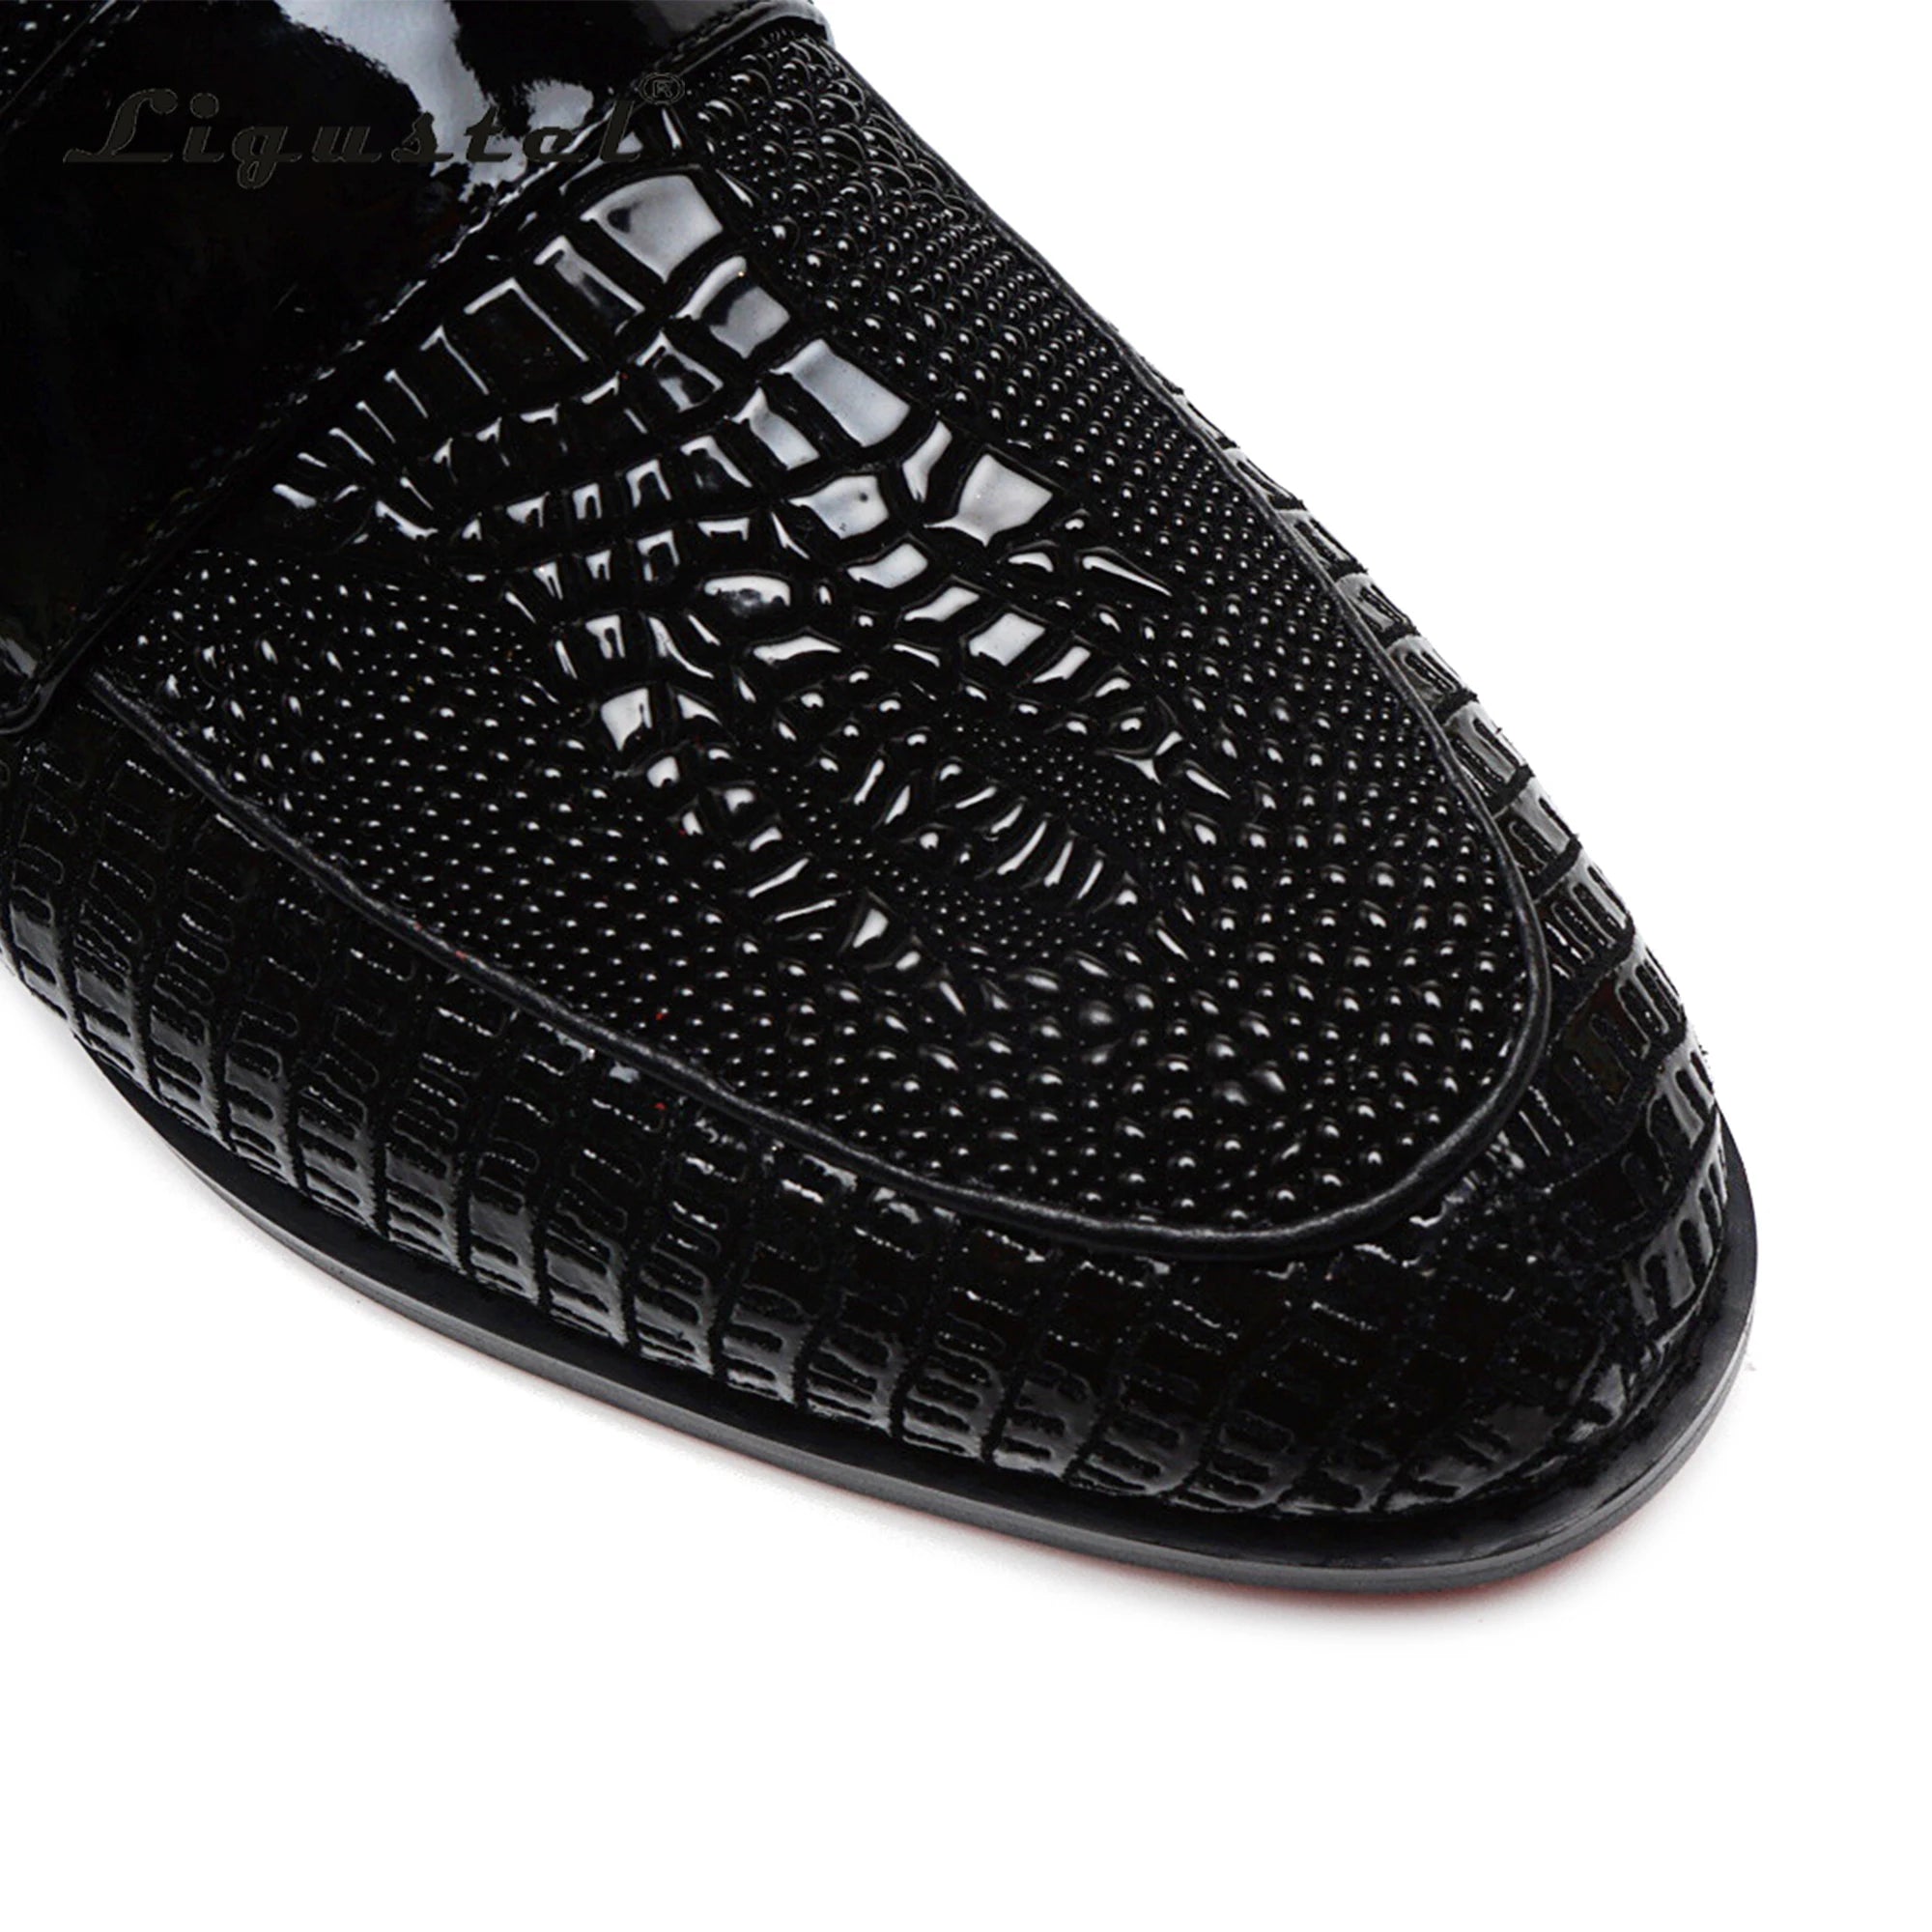 The LOM - Luxury red bottom alligator print leather loafers for men